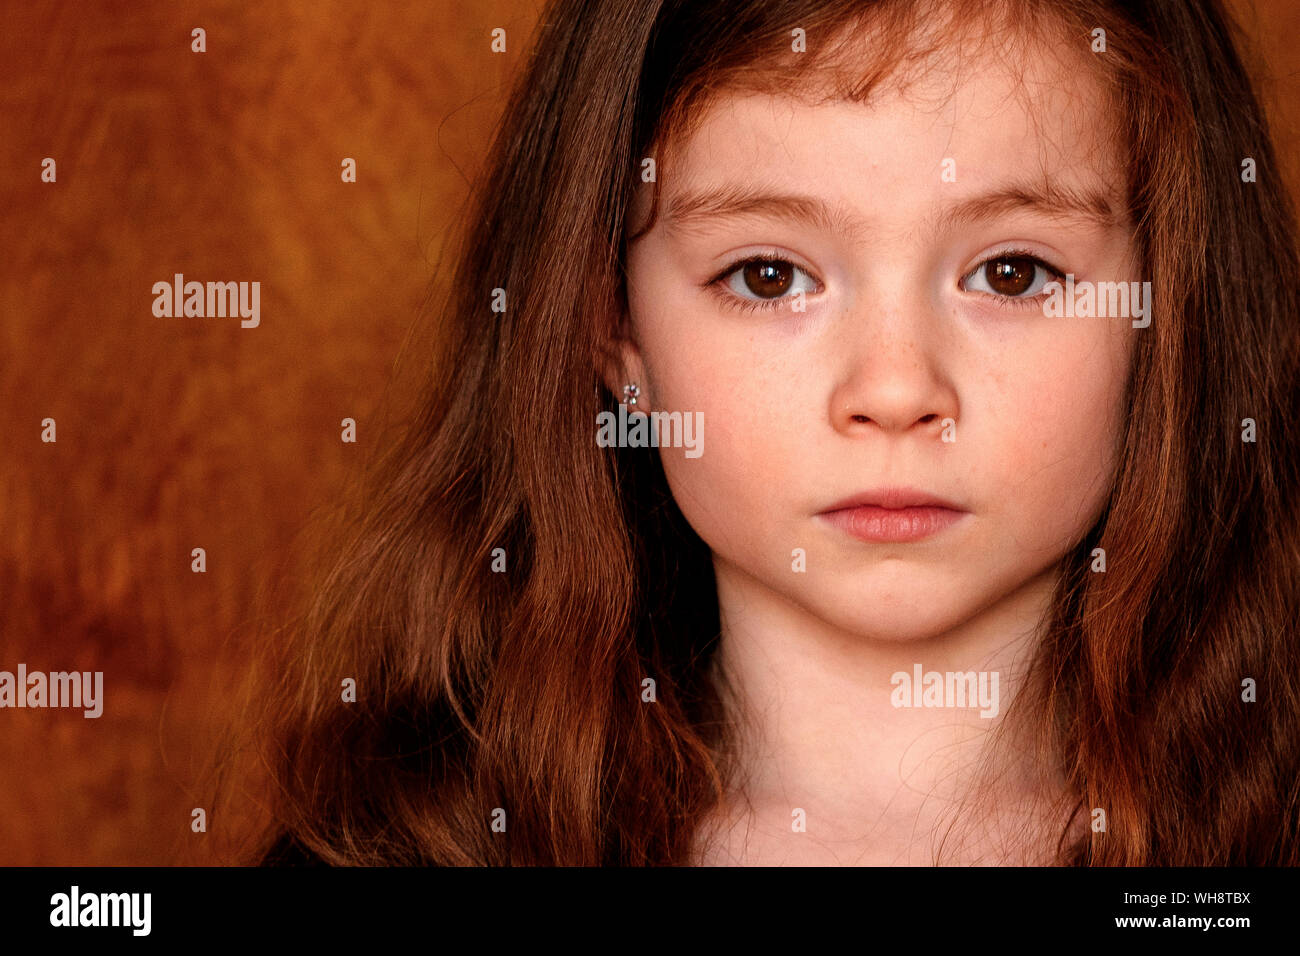 Portrait of little girl with brown hairs and eyes Stock Photo